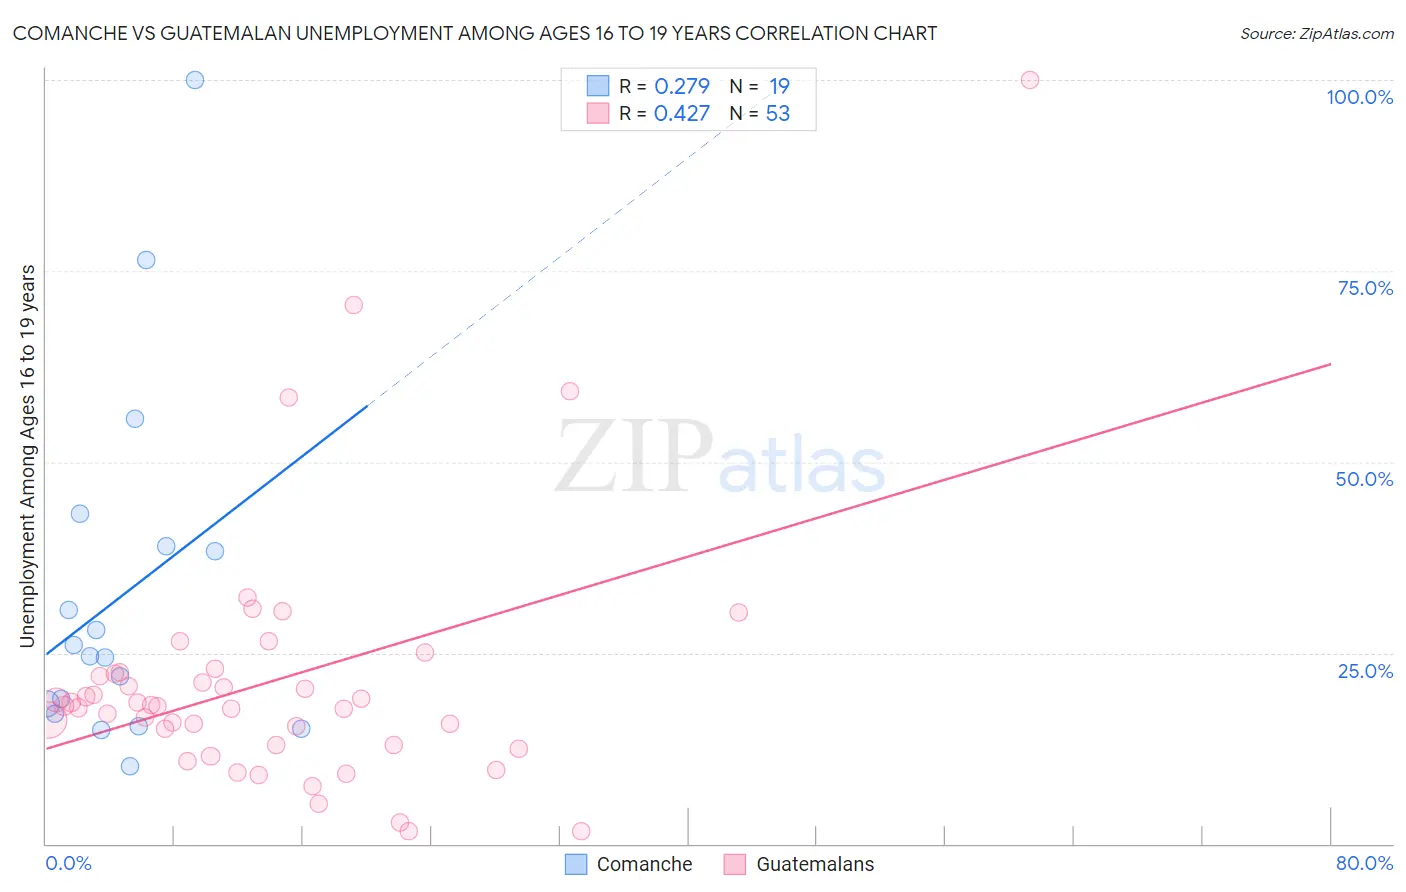 Comanche vs Guatemalan Unemployment Among Ages 16 to 19 years